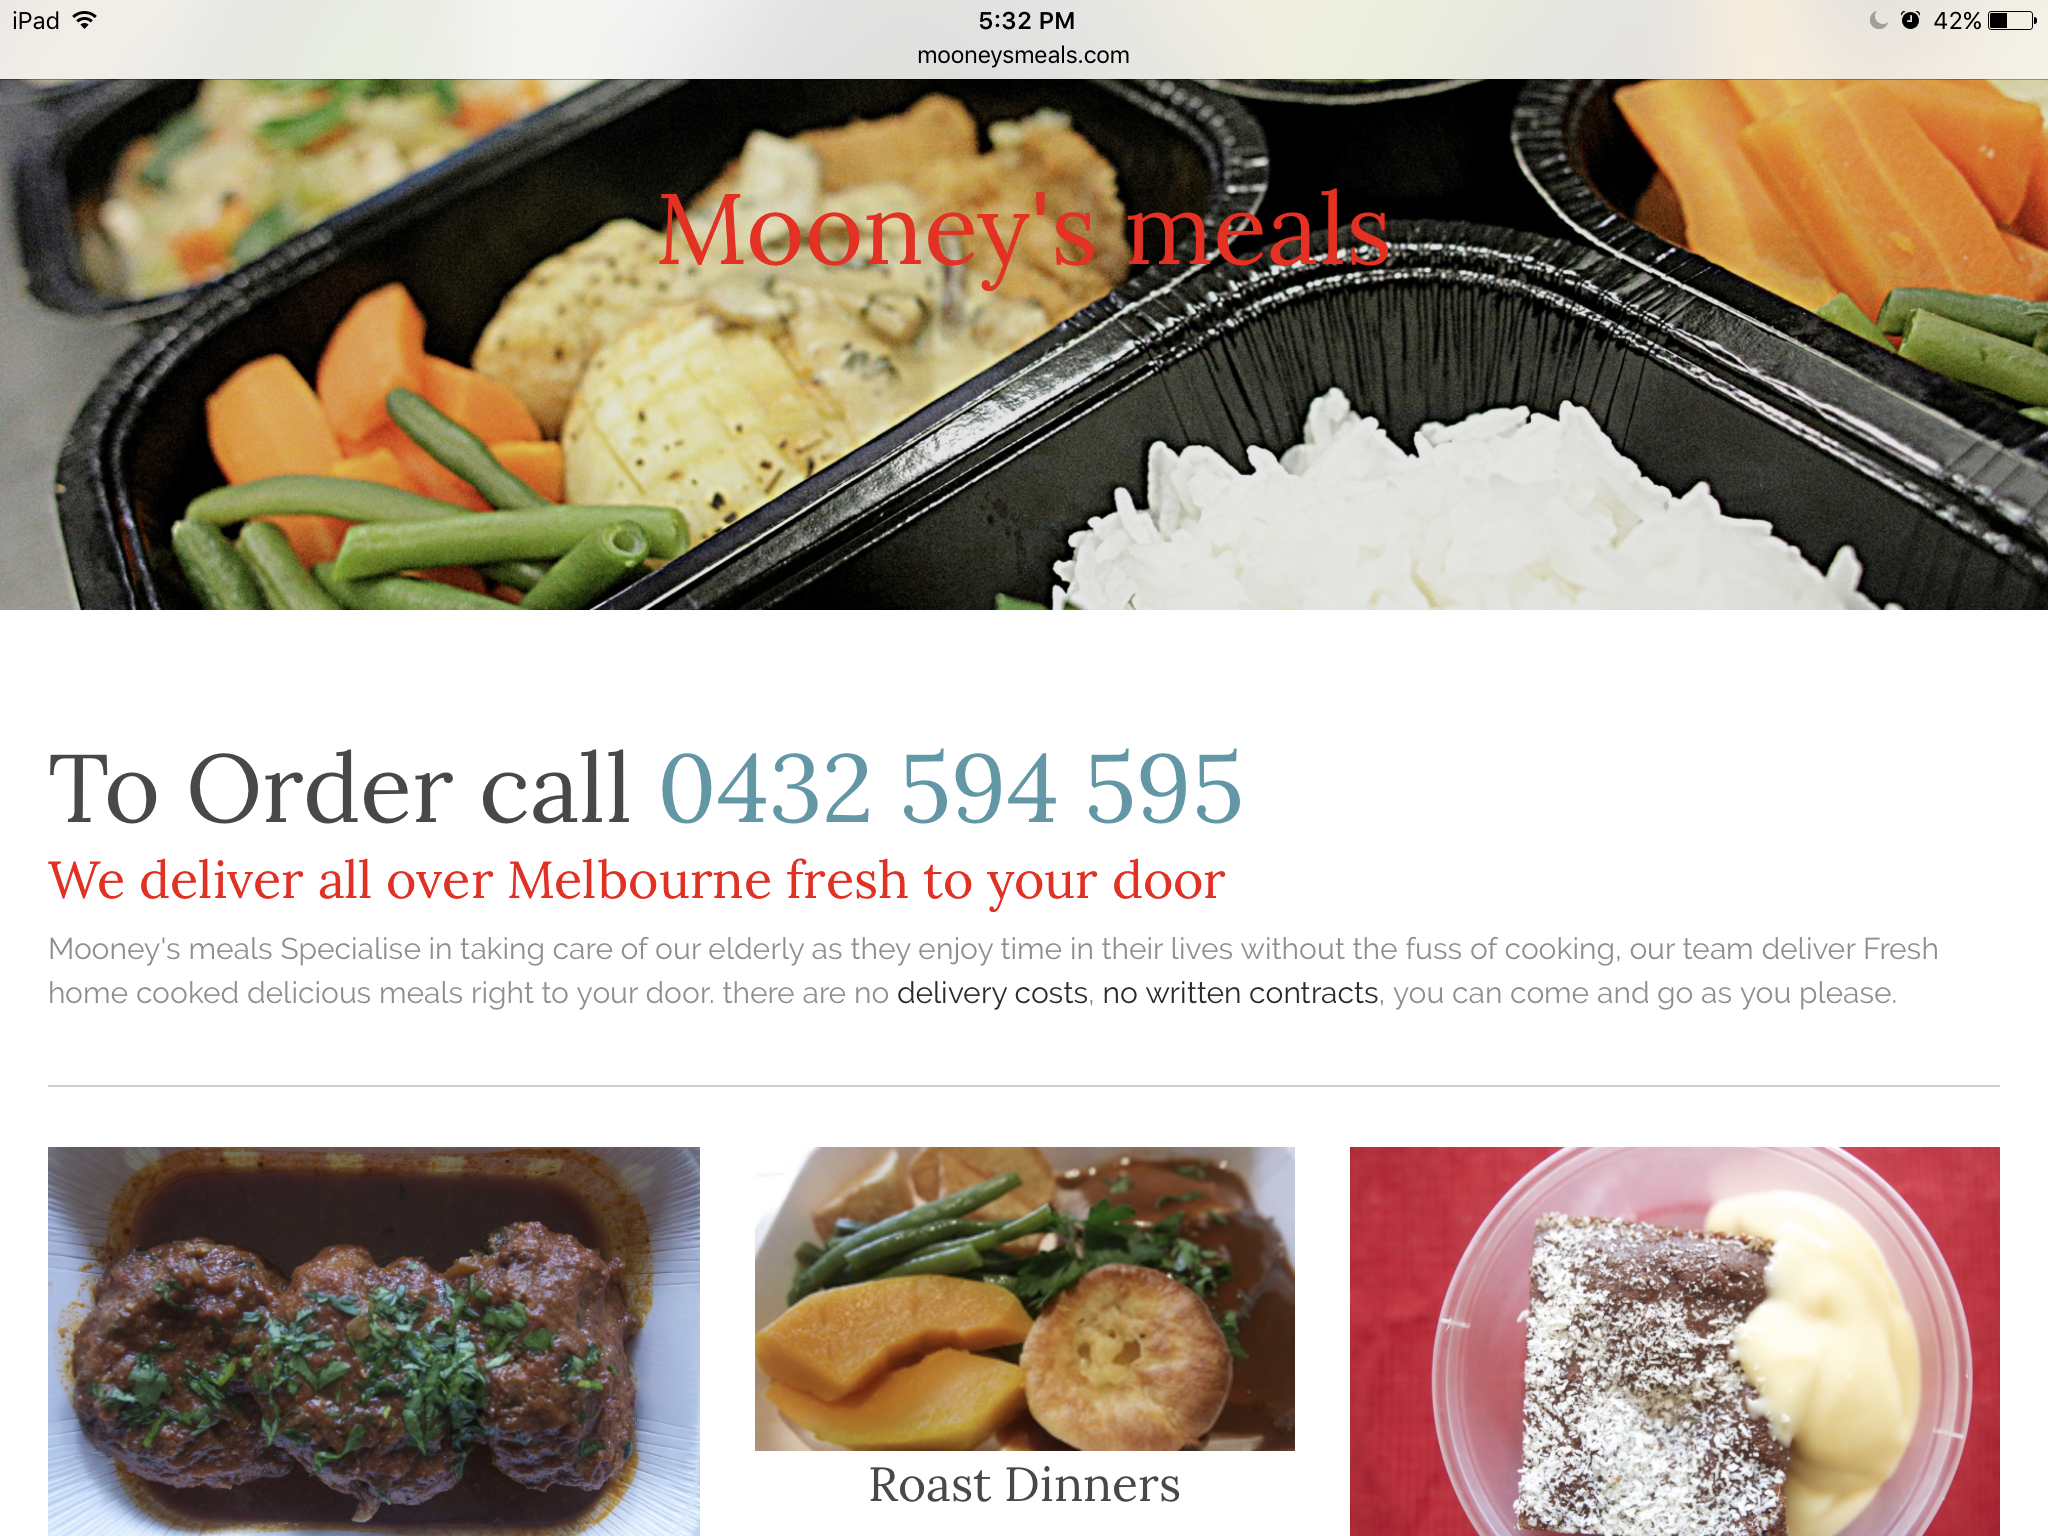 Ready made meals delivered to your door. Freshly made, local,produce